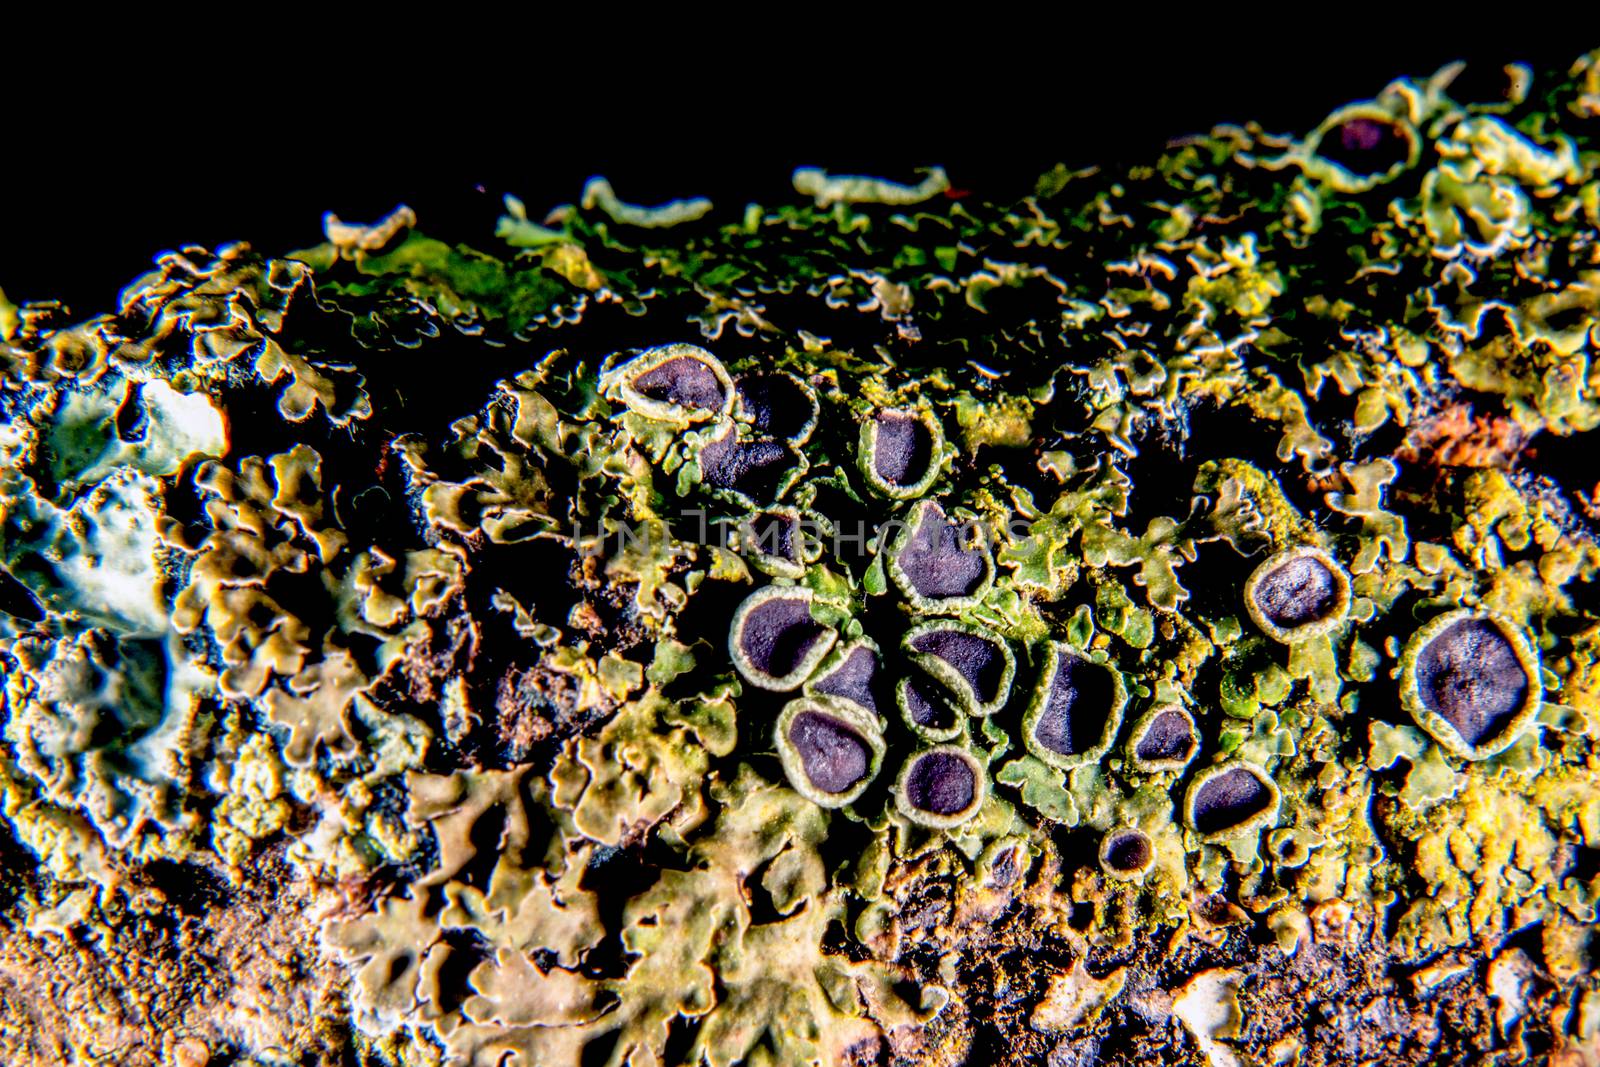 Lichen symbiotic with some reproductive fruiting bodies